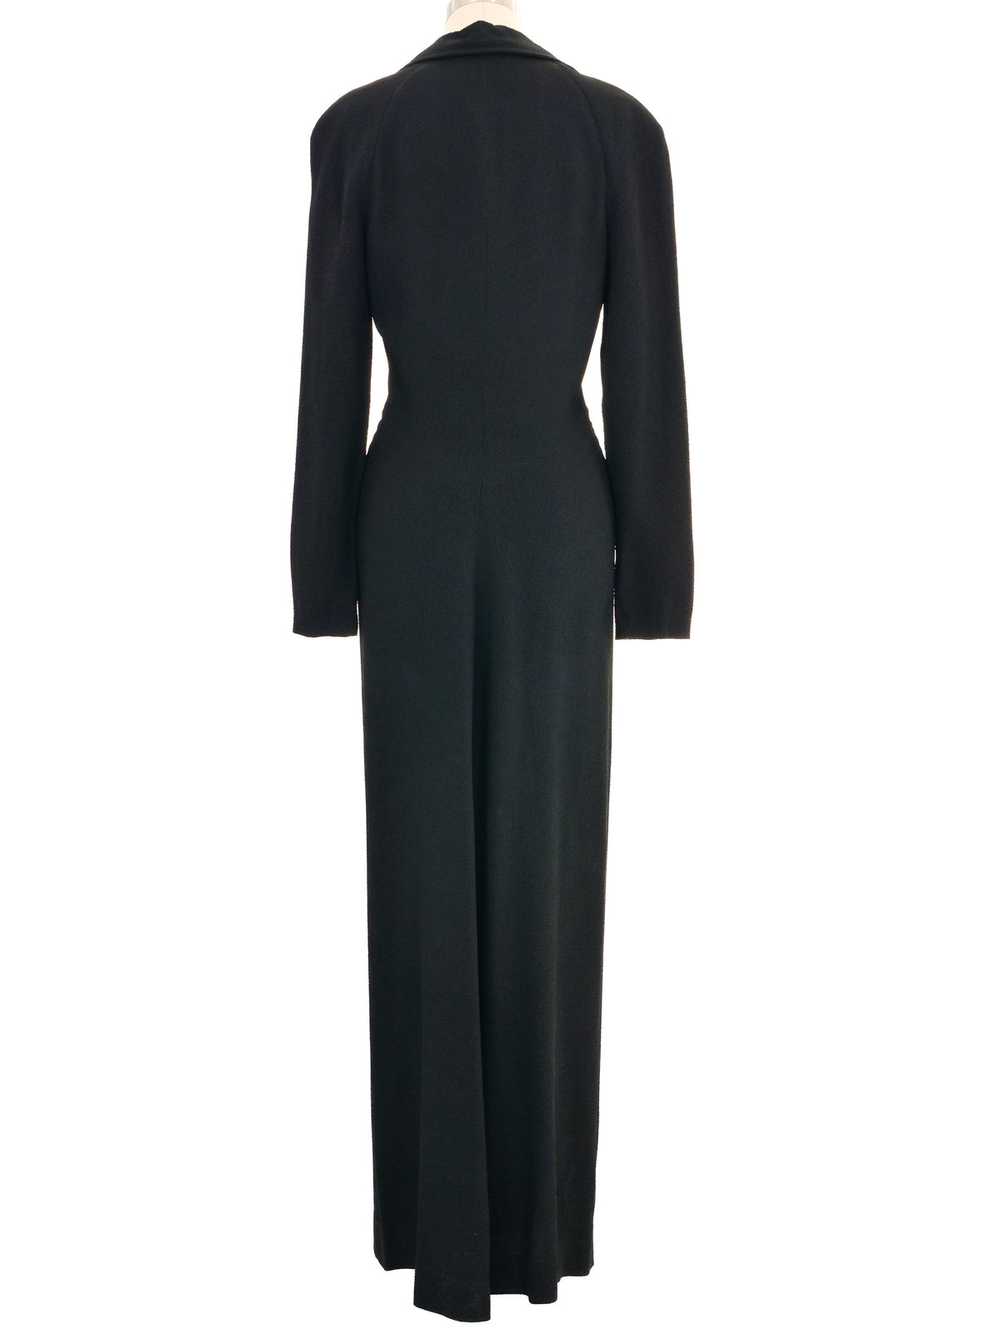 Chloe Black Crepe Ruched Front Gown - image 4